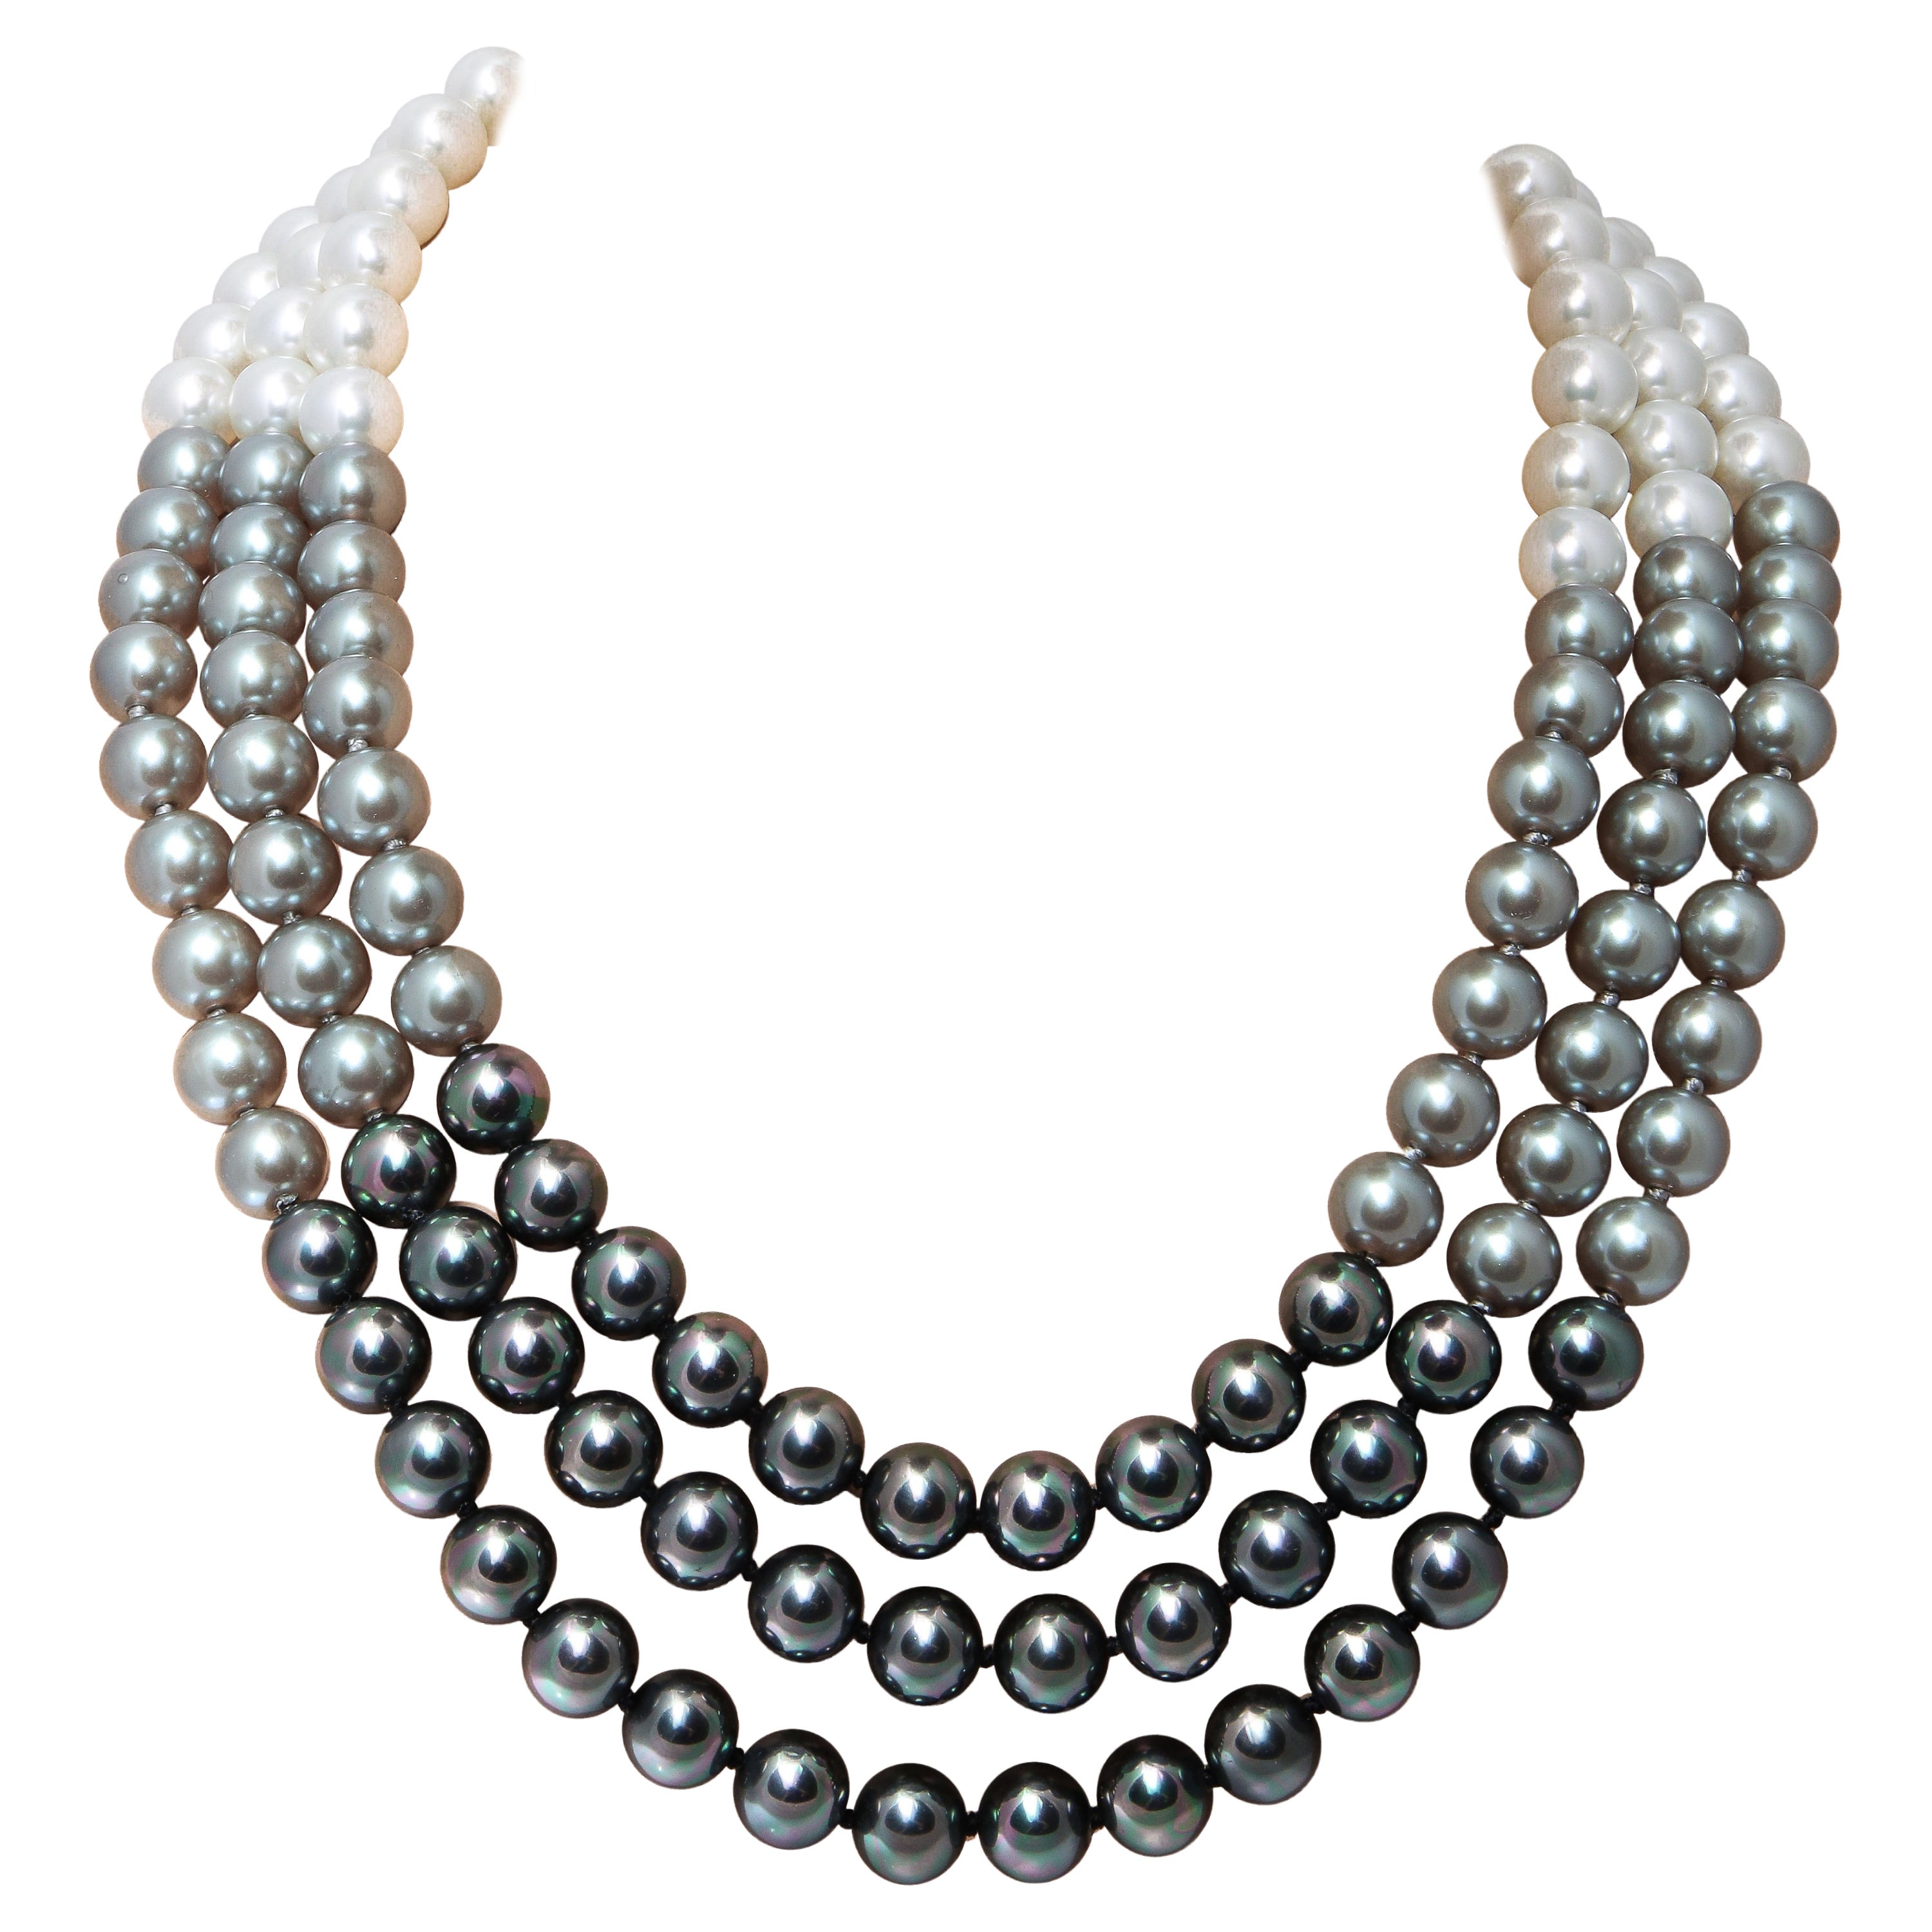  Shaded South Sea Manmade Pearls  Separable Three Necklaces Mikimoto Style For Sale